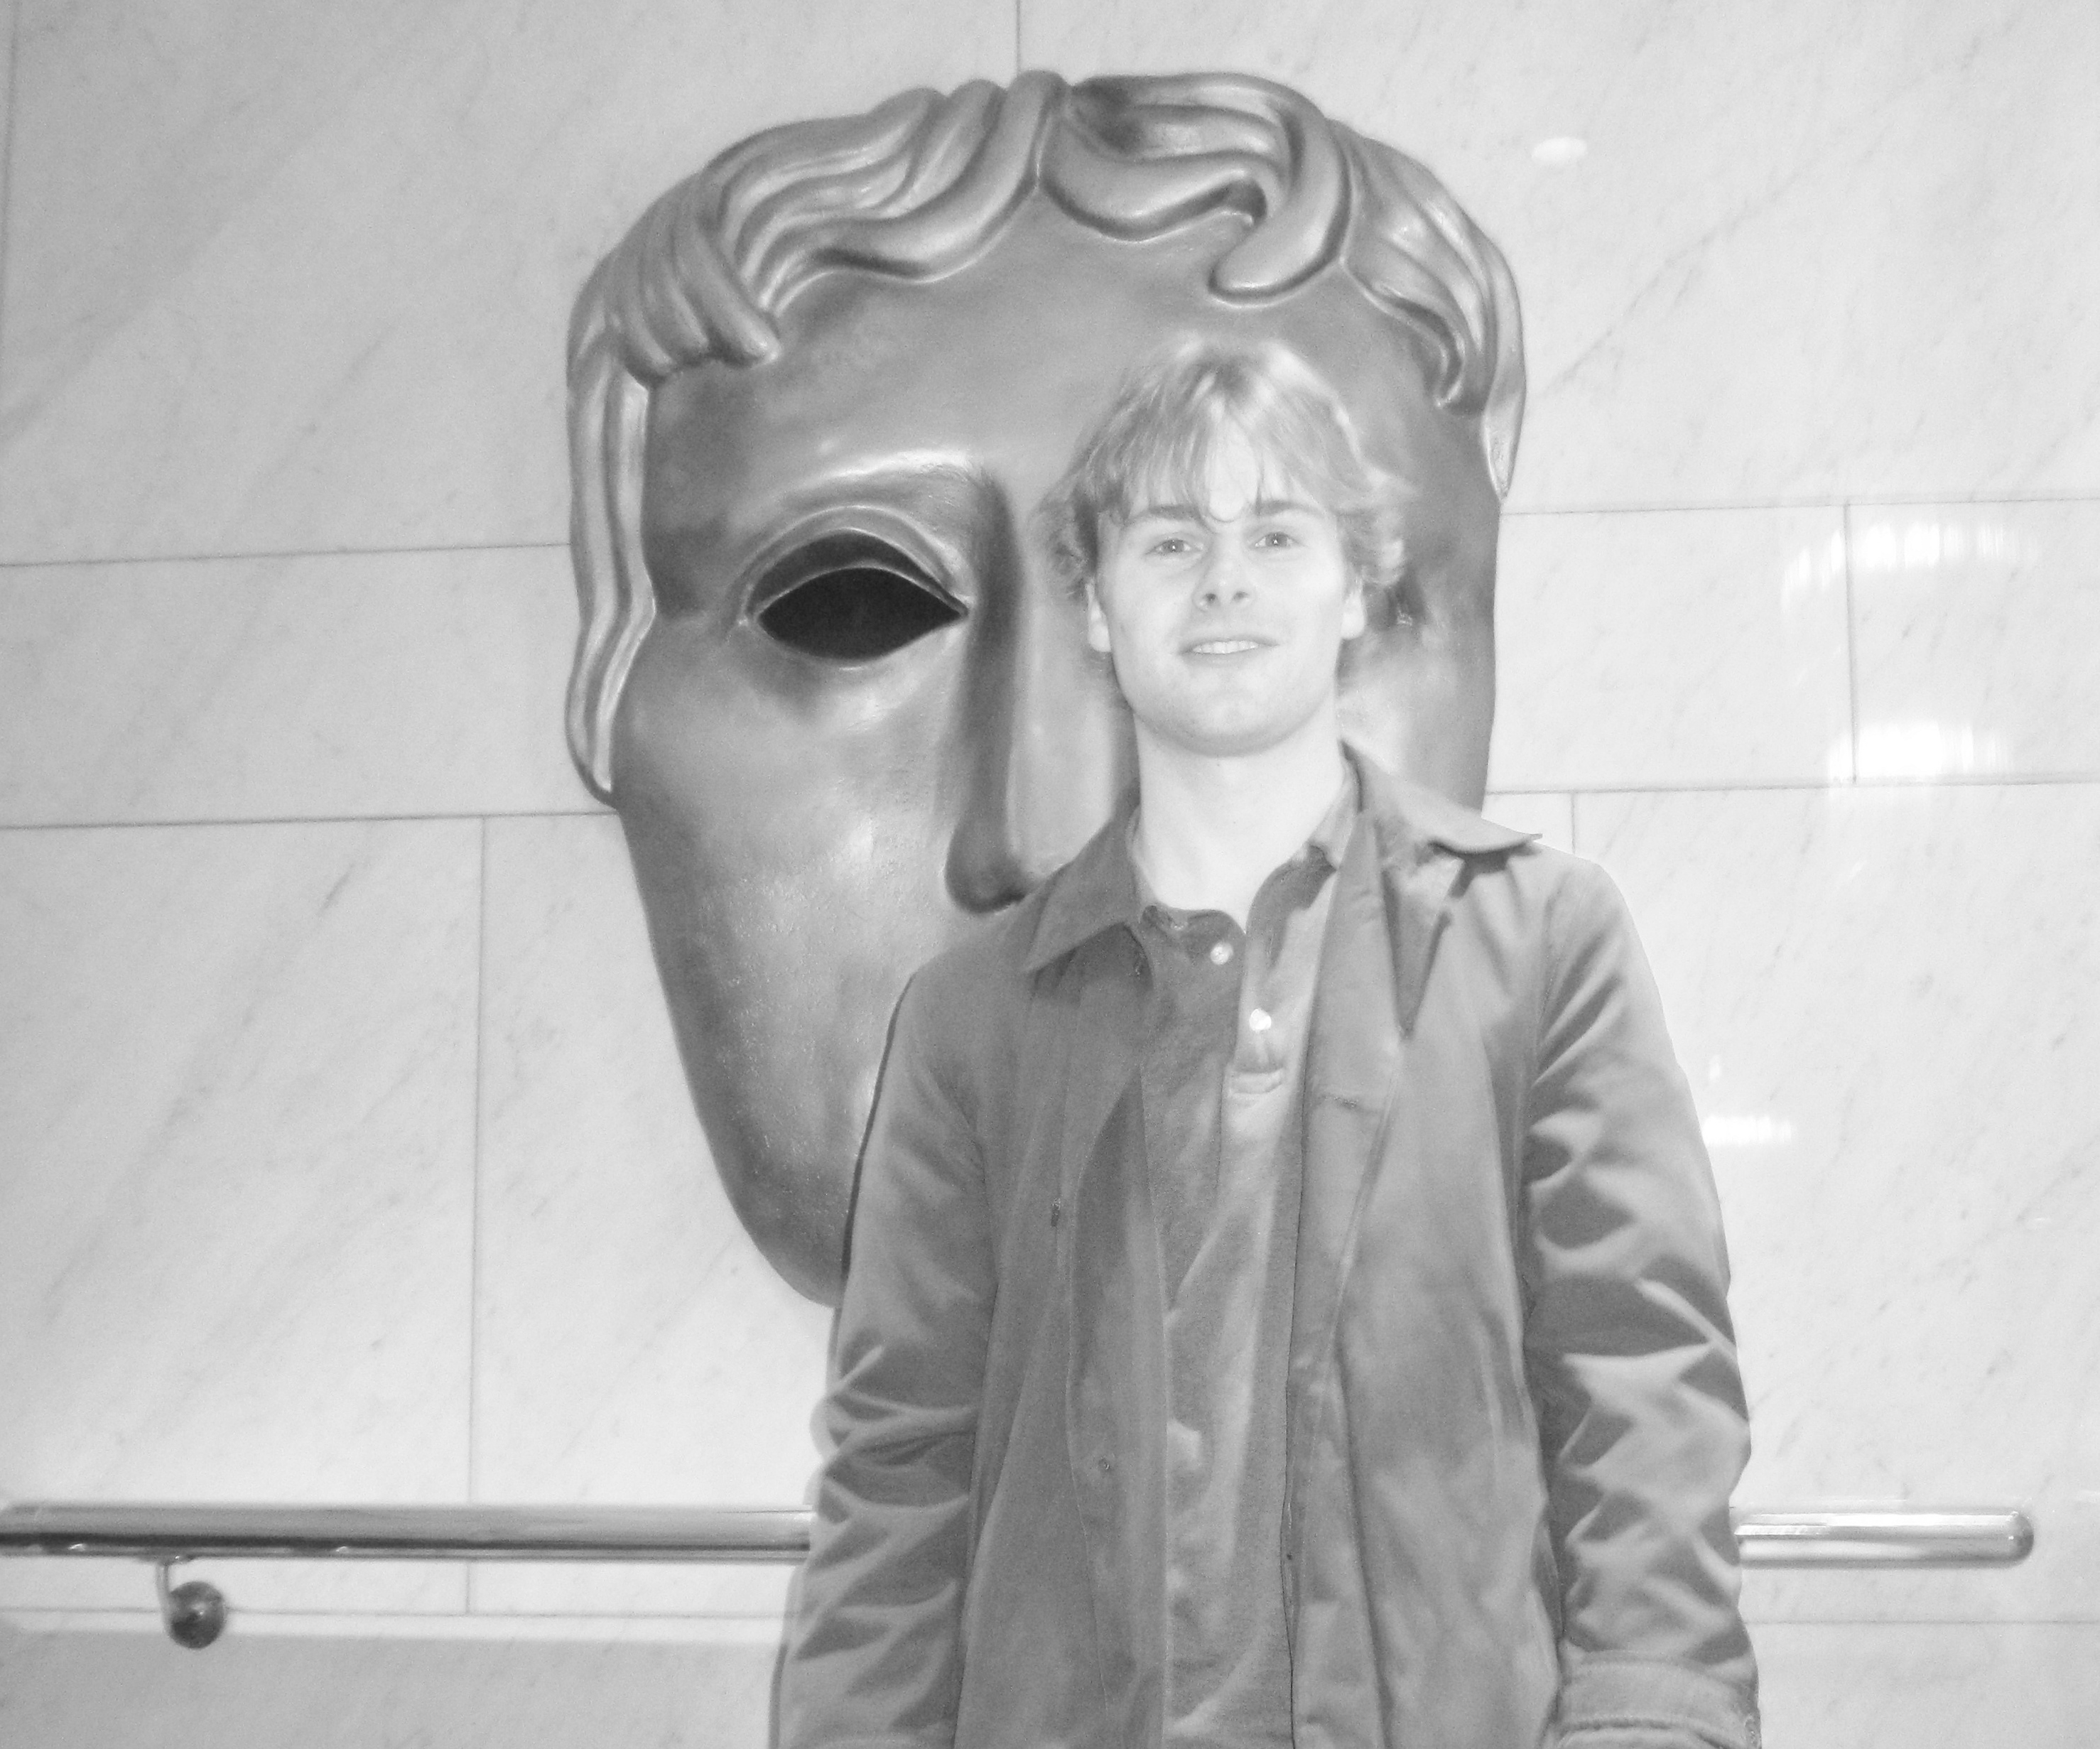 at BAFTA for the event of 'The Casual Vacancy'